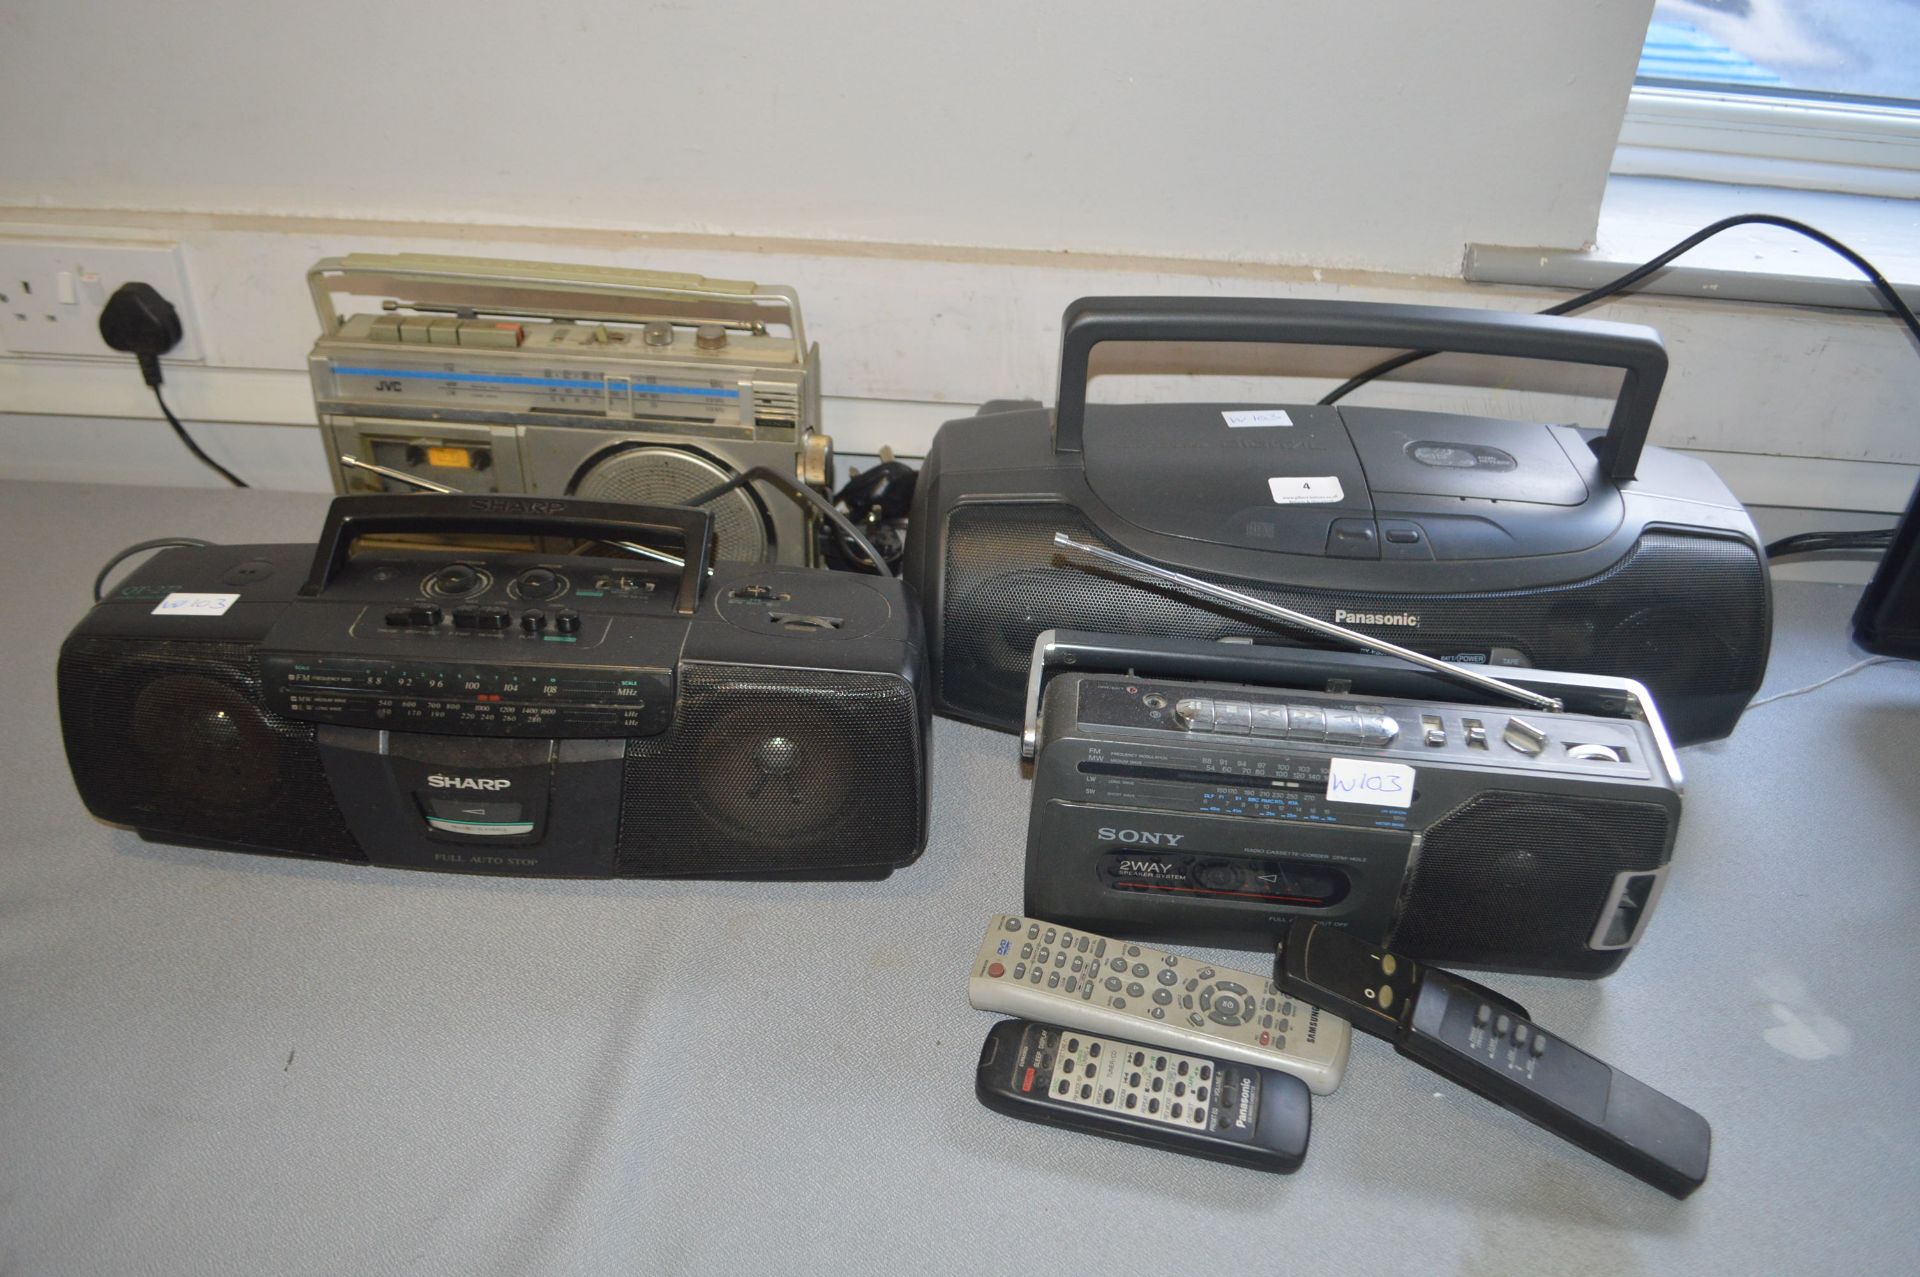 *Twin CD and Cassette Players plus Radios etc